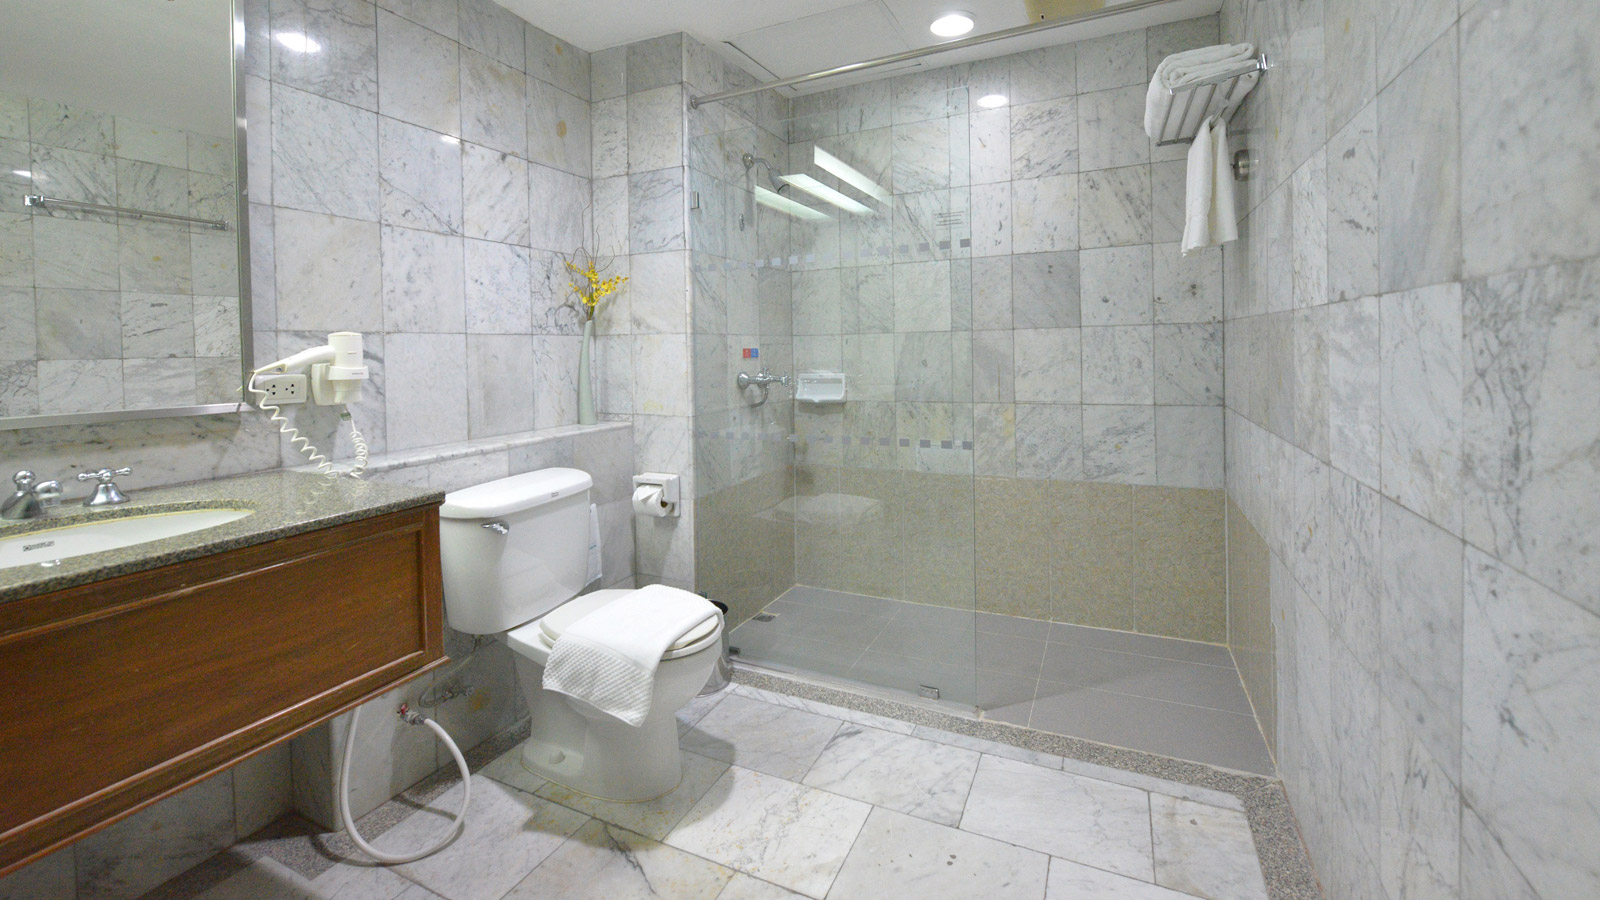 Executive Suites - Bathroom at Loei Palace Hotel - 黎府宫殿酒店